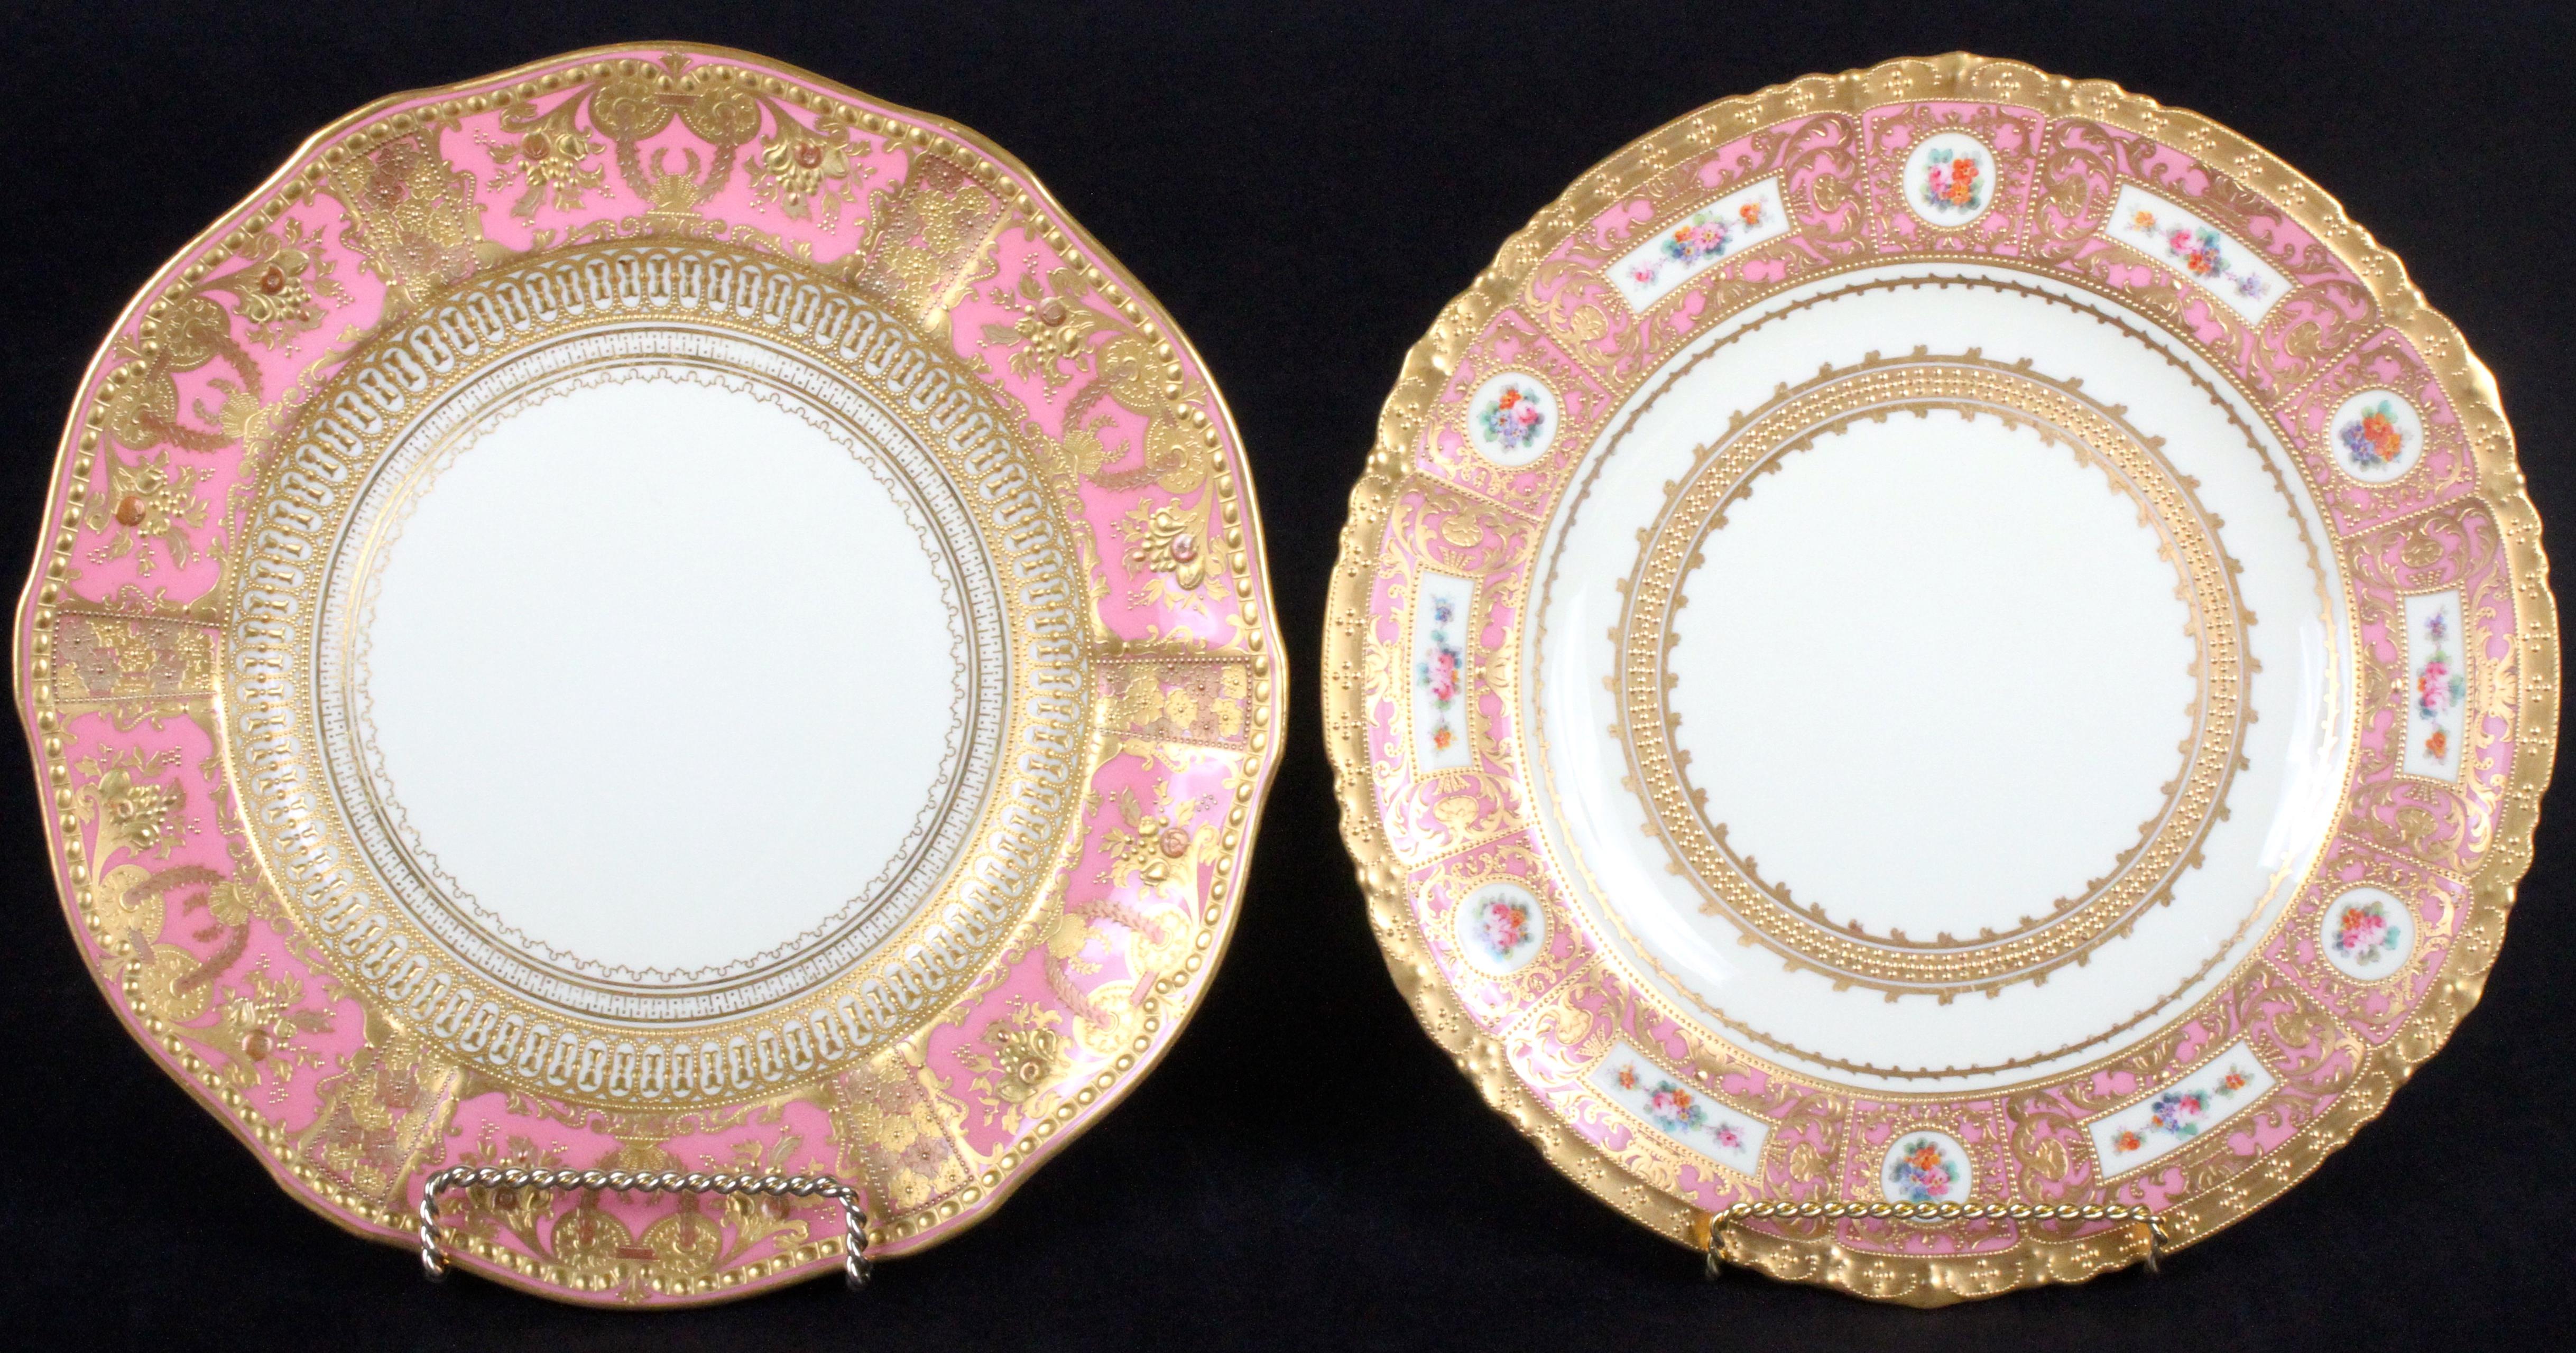 Service of 19th Century Derby Pink Service Plates with Elaborate 2-Color Gilding 1